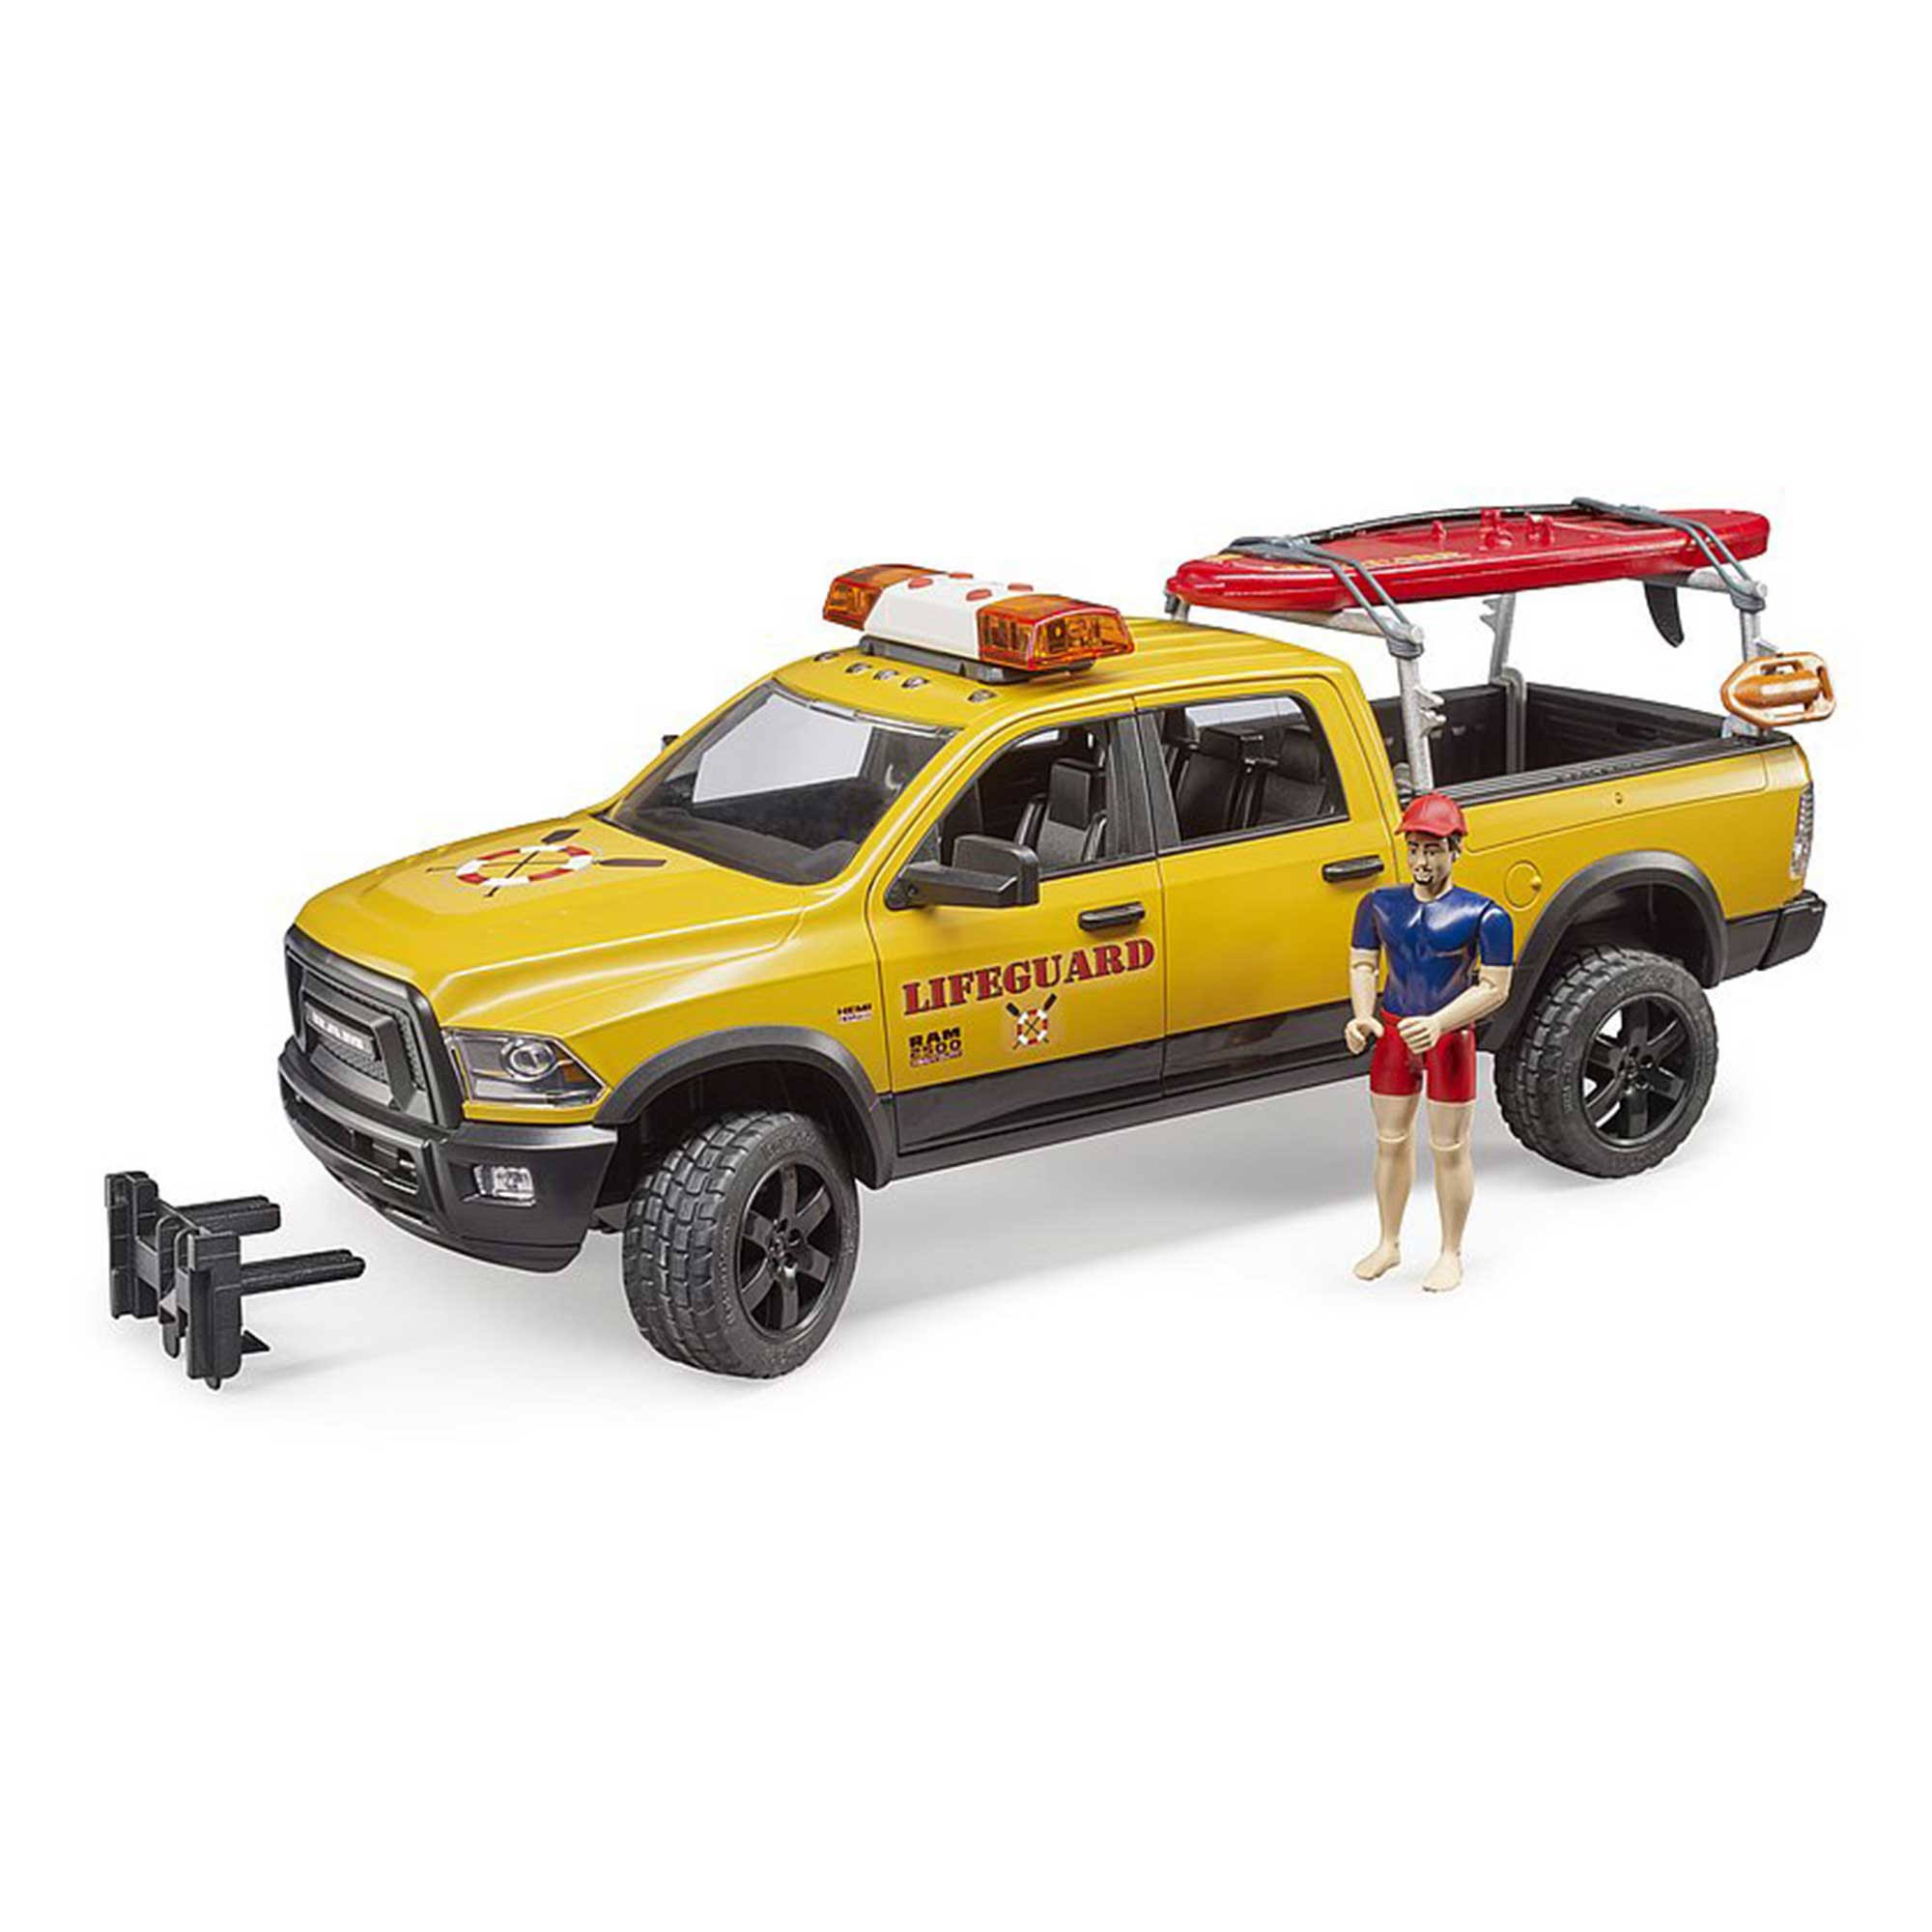 Bruder RAM 2500 Power Wagon - Life Guard with Figure